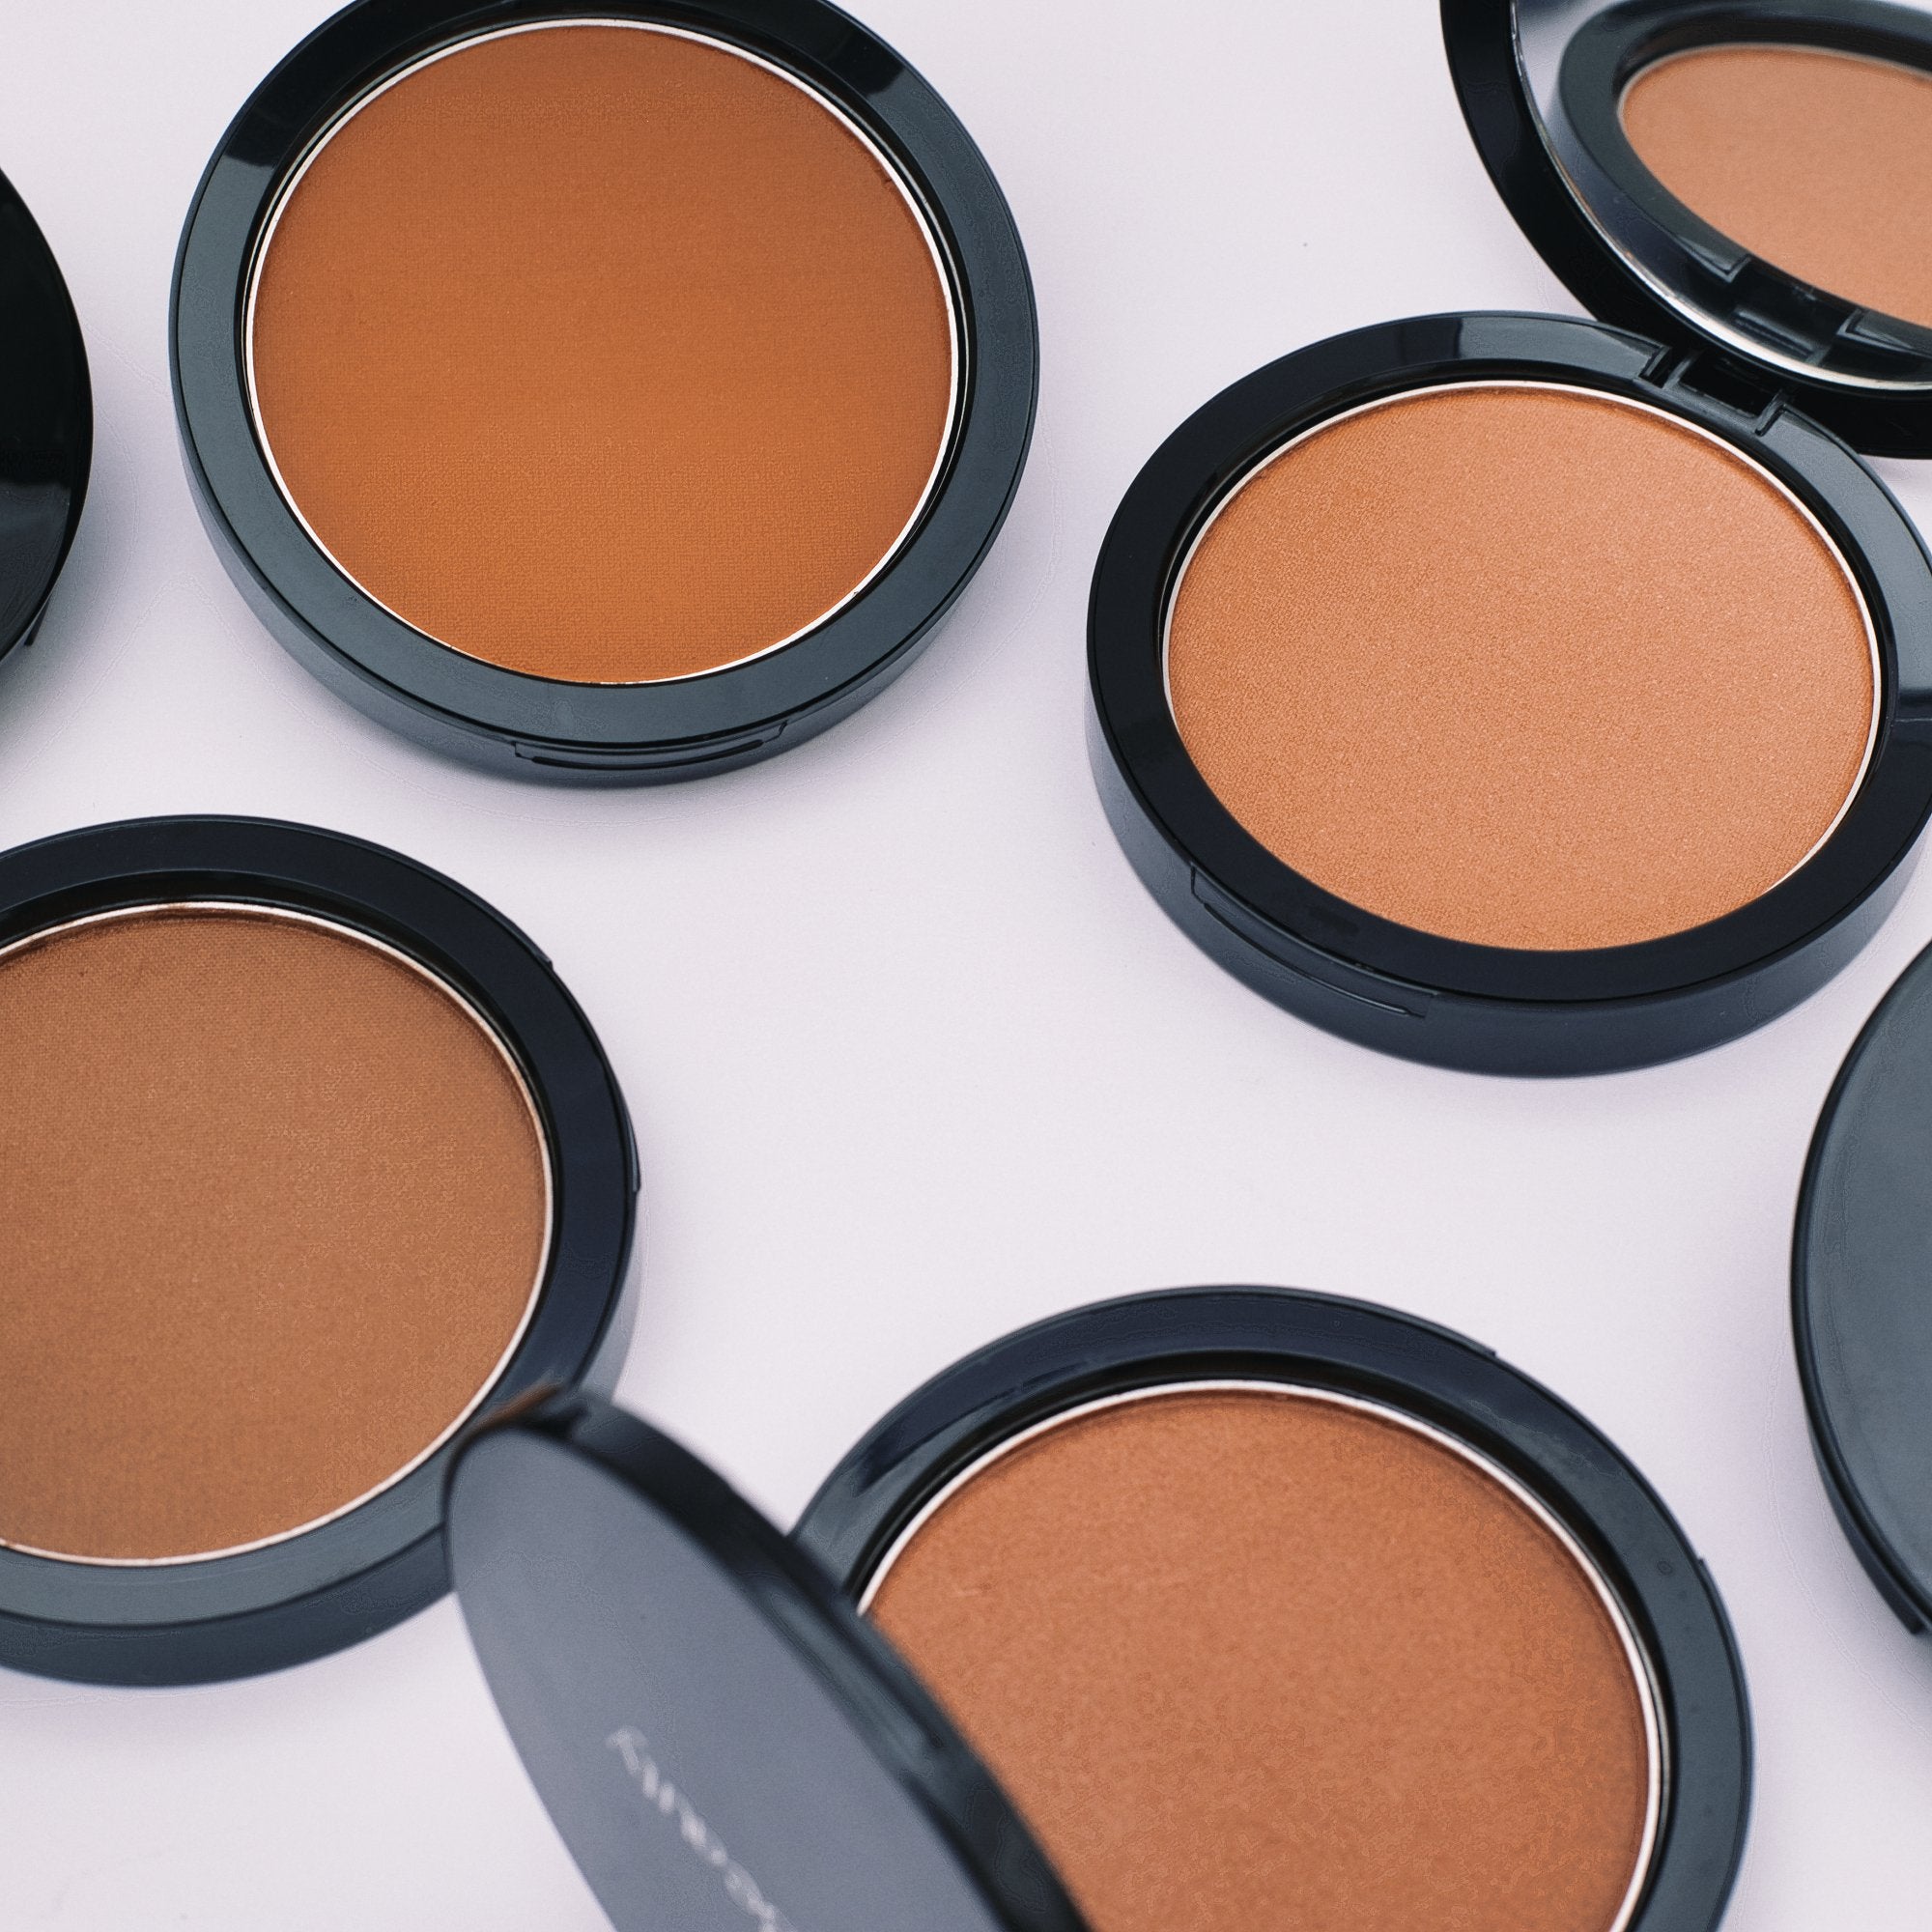 The Ultimate Guide to Bronzers vs Contouring Which Should You Choose? - Berla Beauty